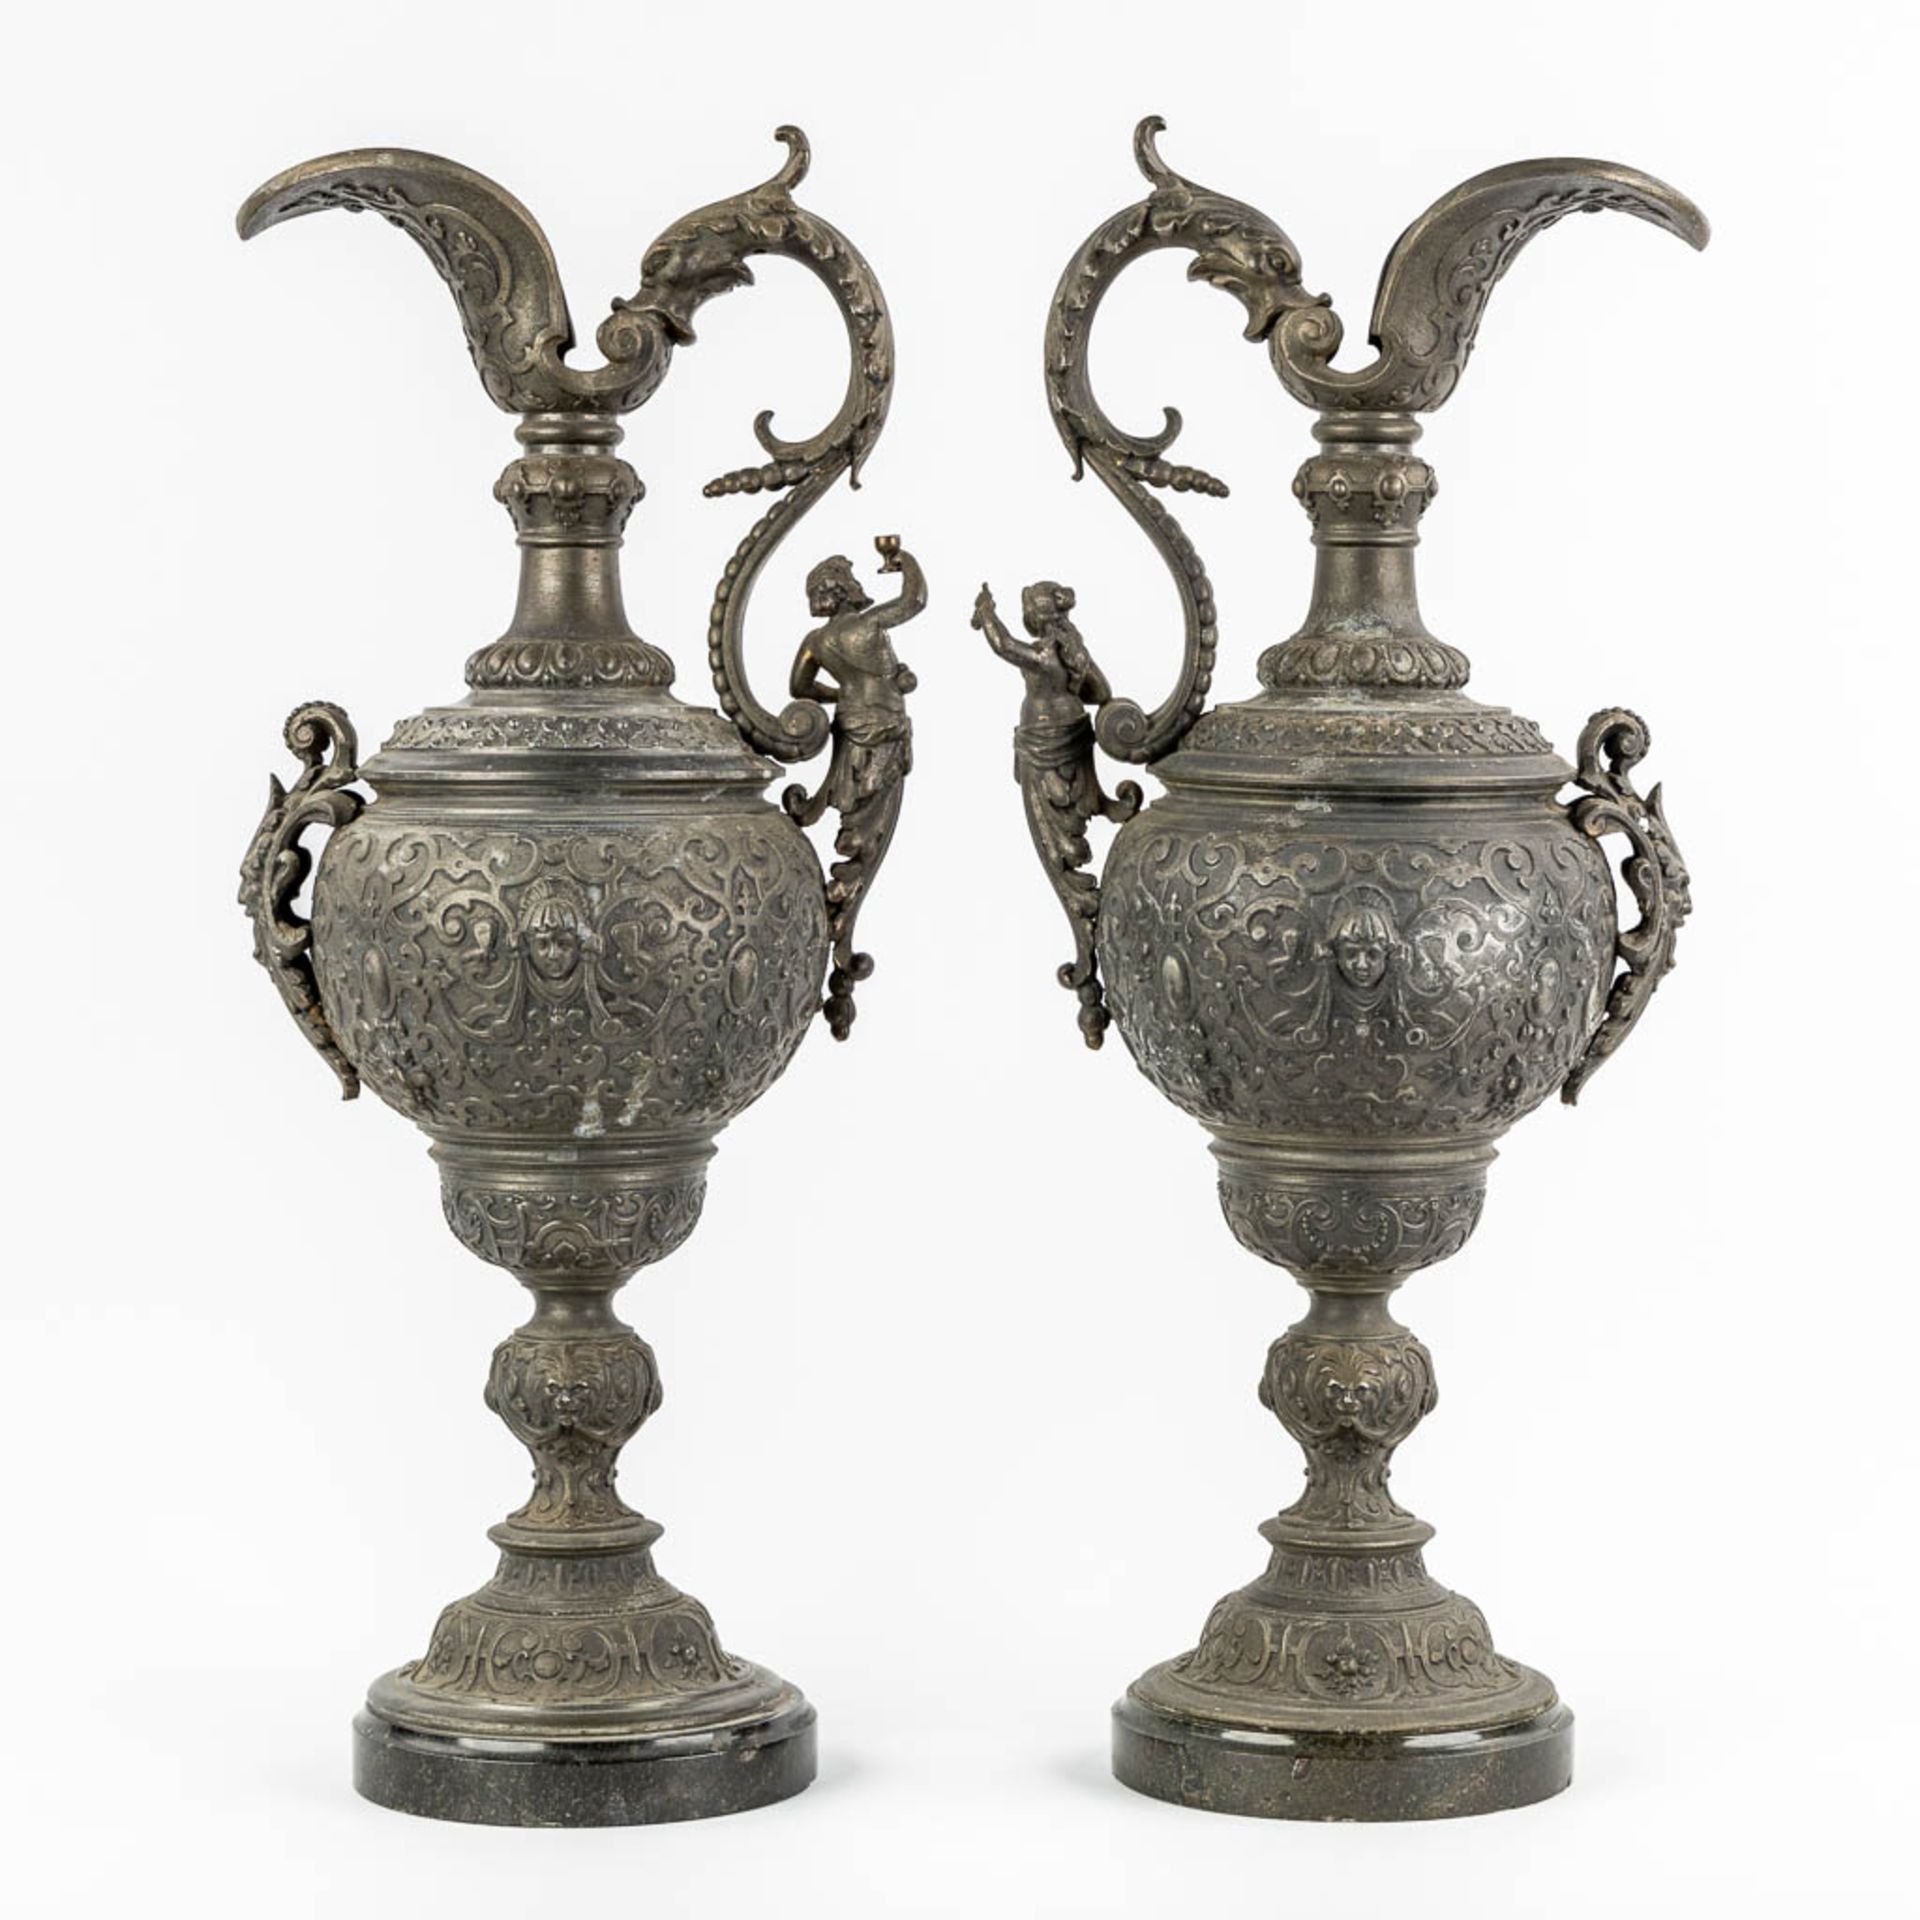 A pair of decorative pitchers, spelter on a marble base. Circa 1900. (L:18 x W:23 x H:56 cm) - Image 5 of 14